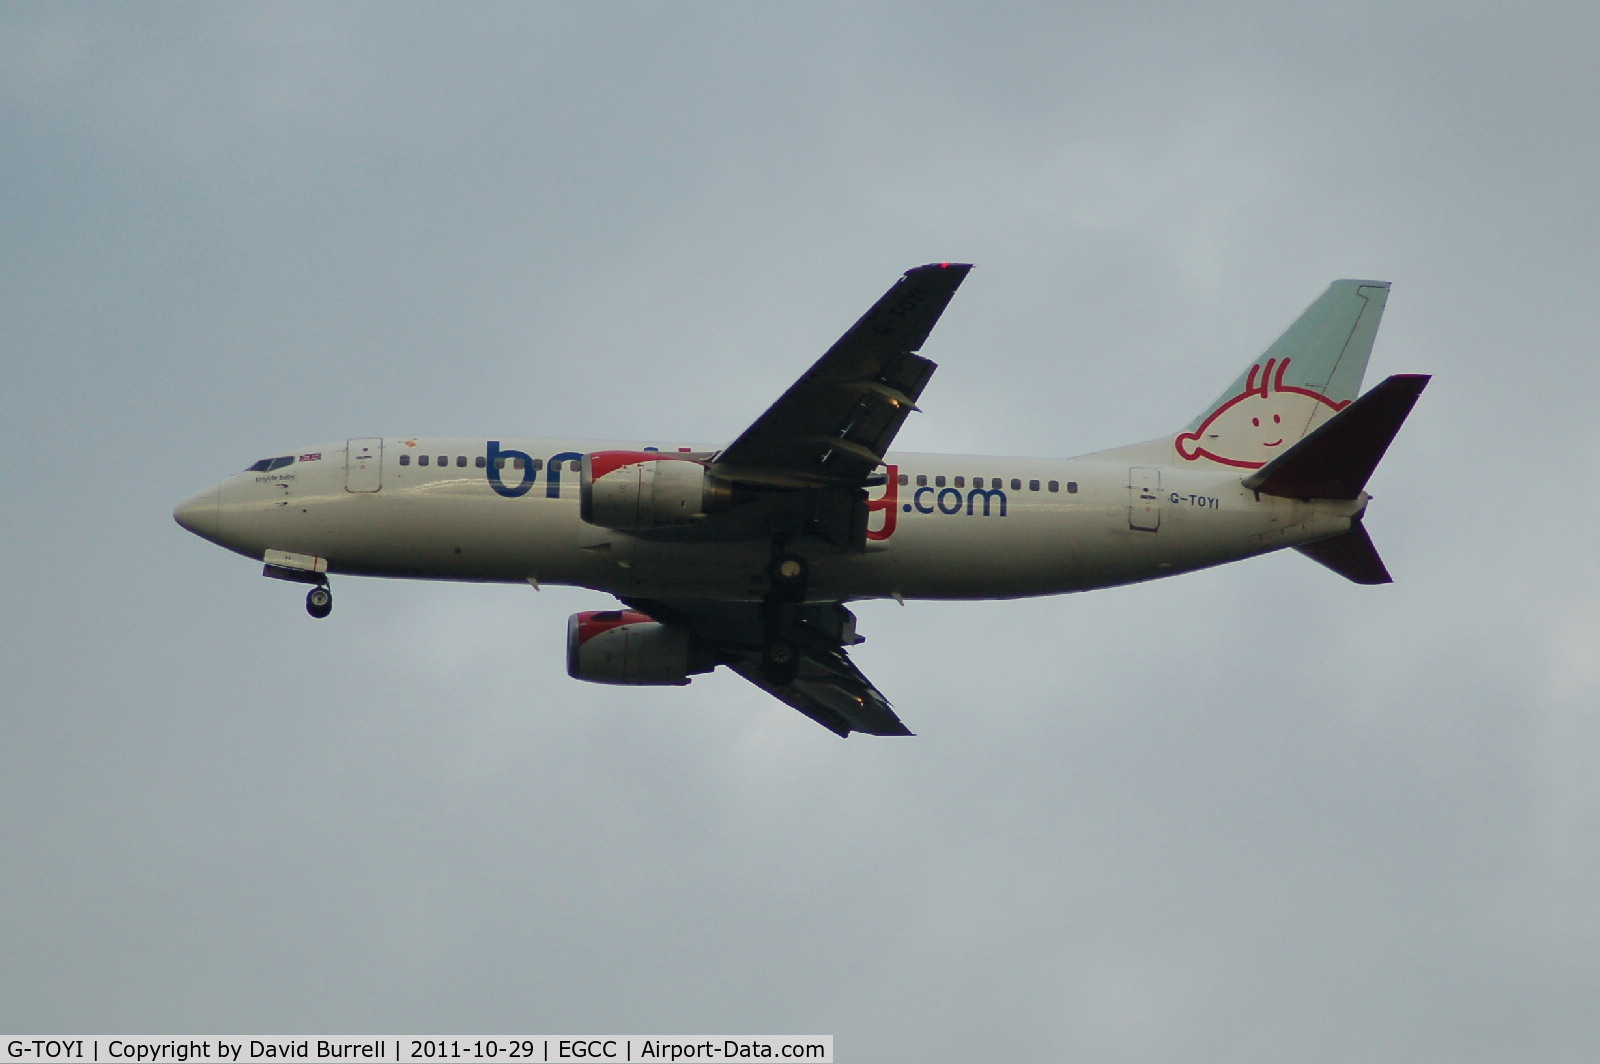 G-TOYI, 1998 Boeing 737-3Q8 C/N 28054, BMI baby Boeing 737-3Q8 on approach to Manchester Airport.